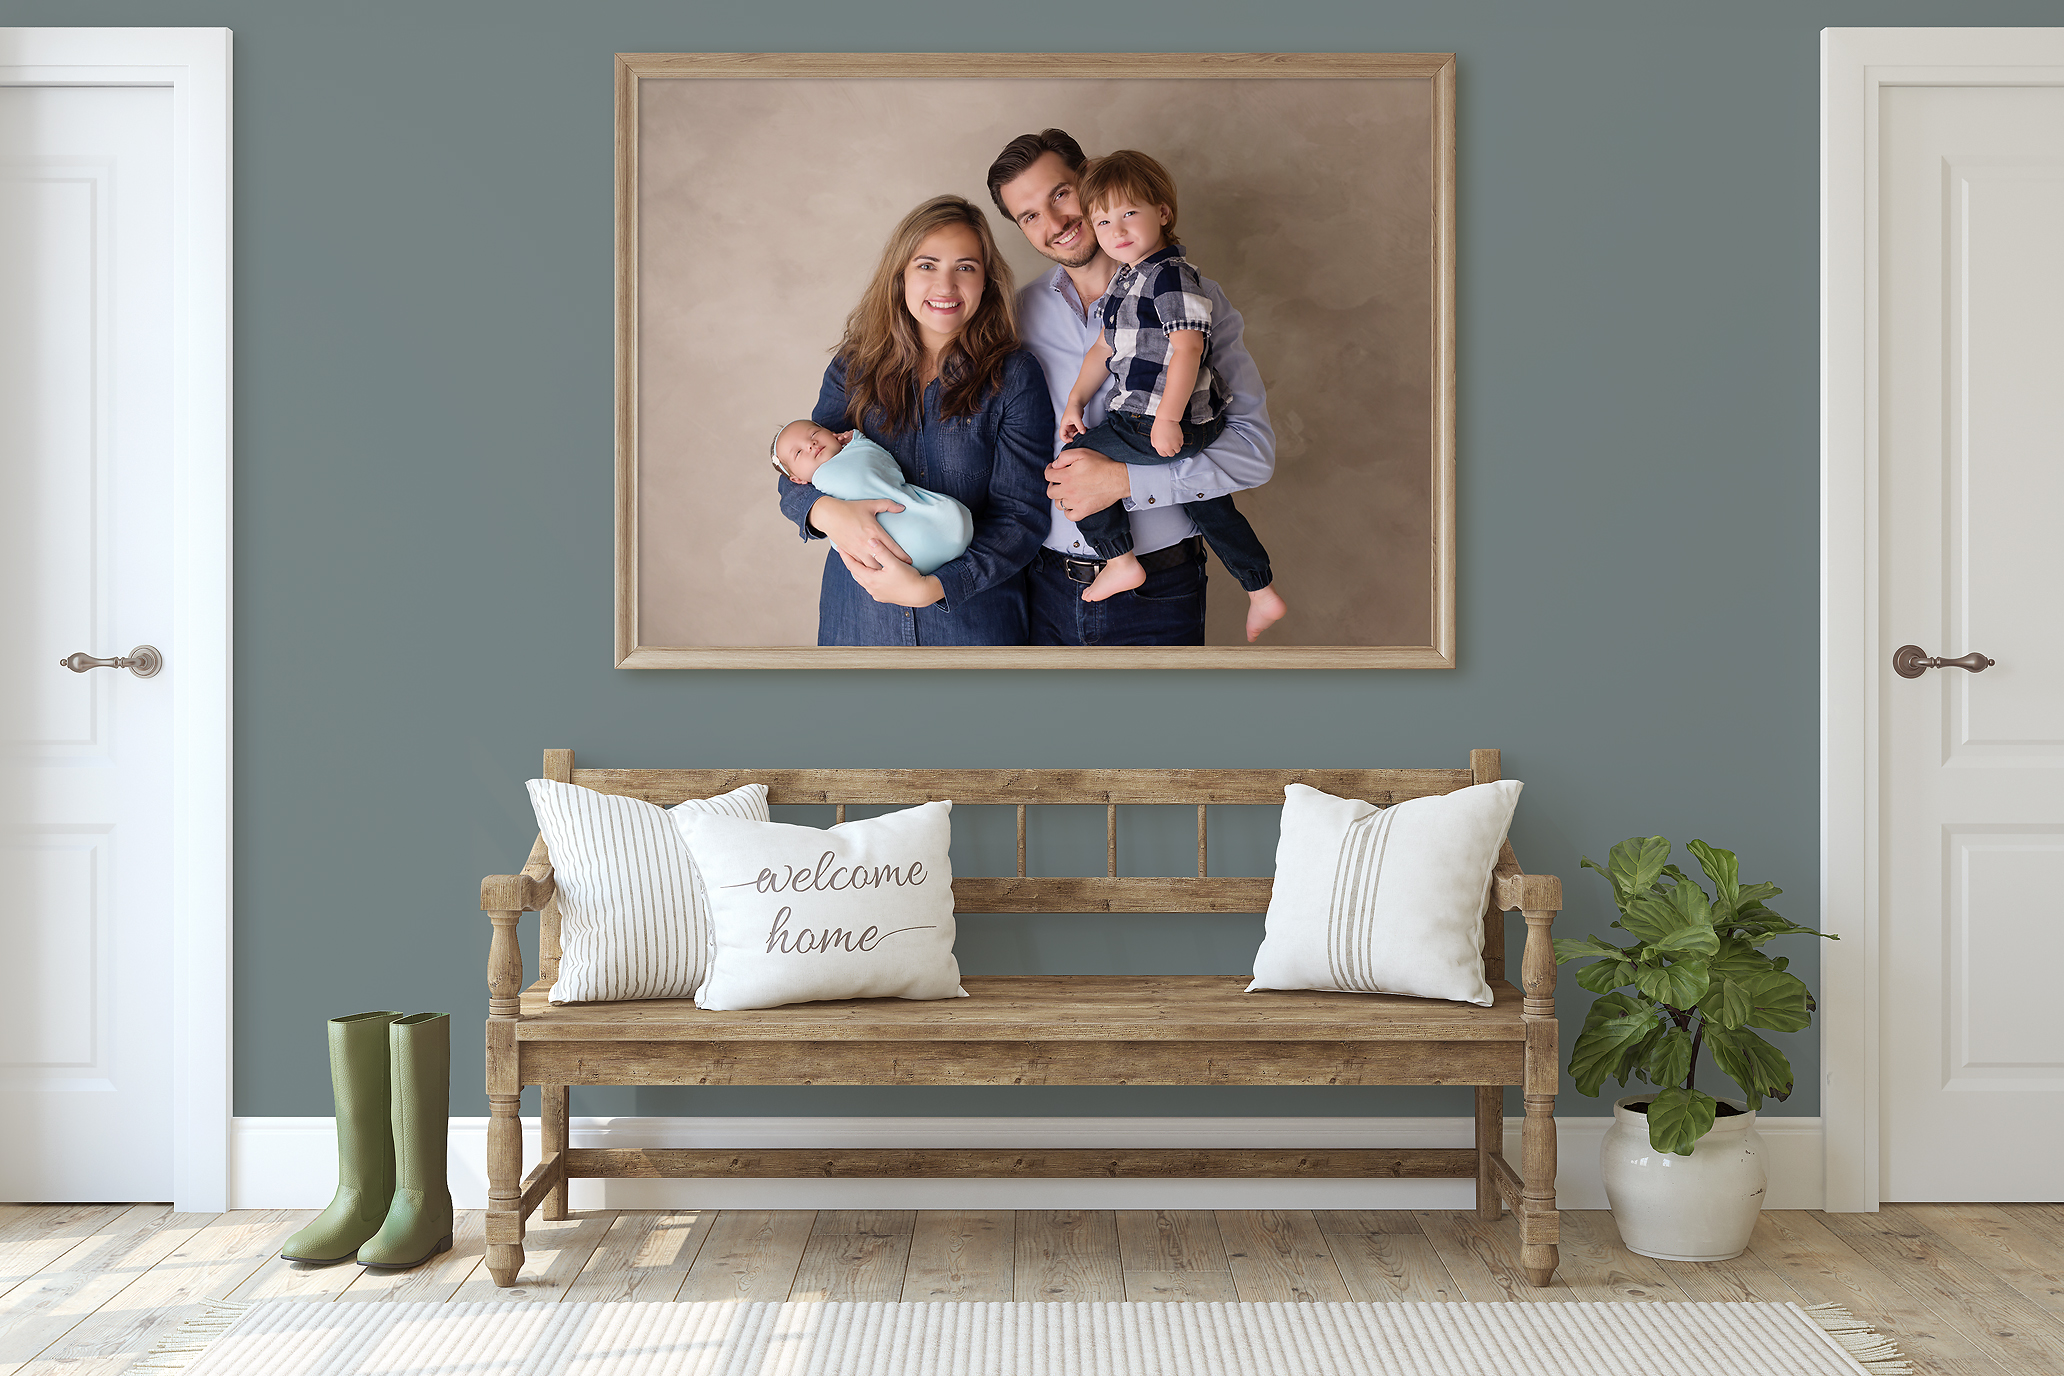 newborn family portrait in a frame in hallway above bench